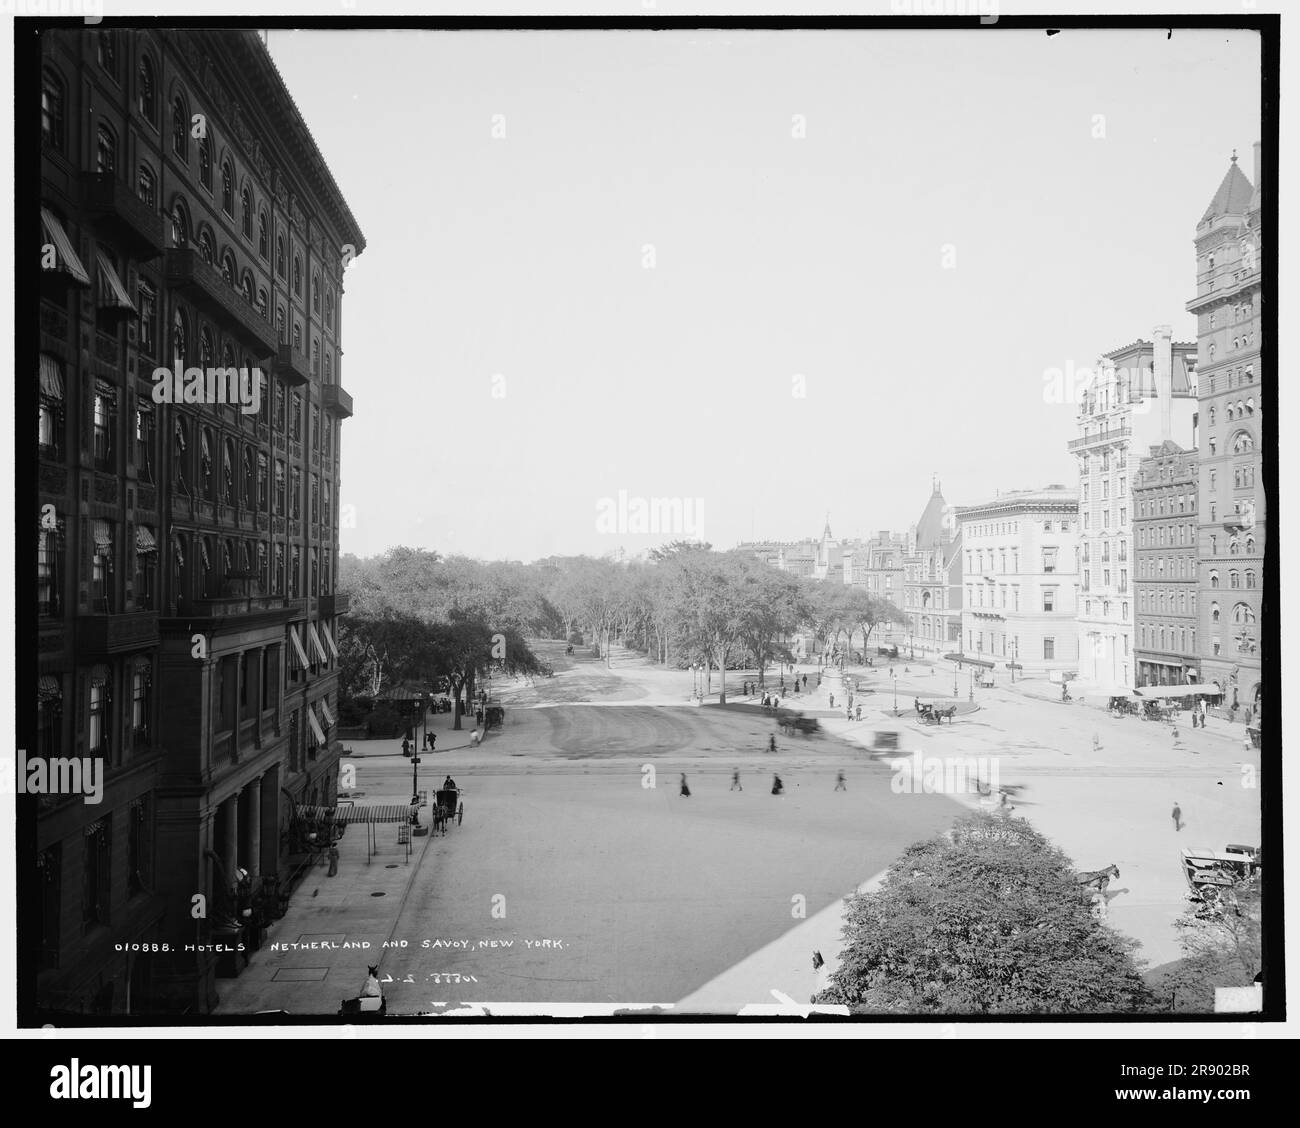 Hotels Netherland and Savoy, New York, c1905. The original Savoy Hotel at Fifth Avenue and 59th Street opened in June 1892. The Hotel New Netherland (later Hotel Netherland) was built in 1892-93 to a design by William H. Hume for William Waldorf Astor. Stock Photo